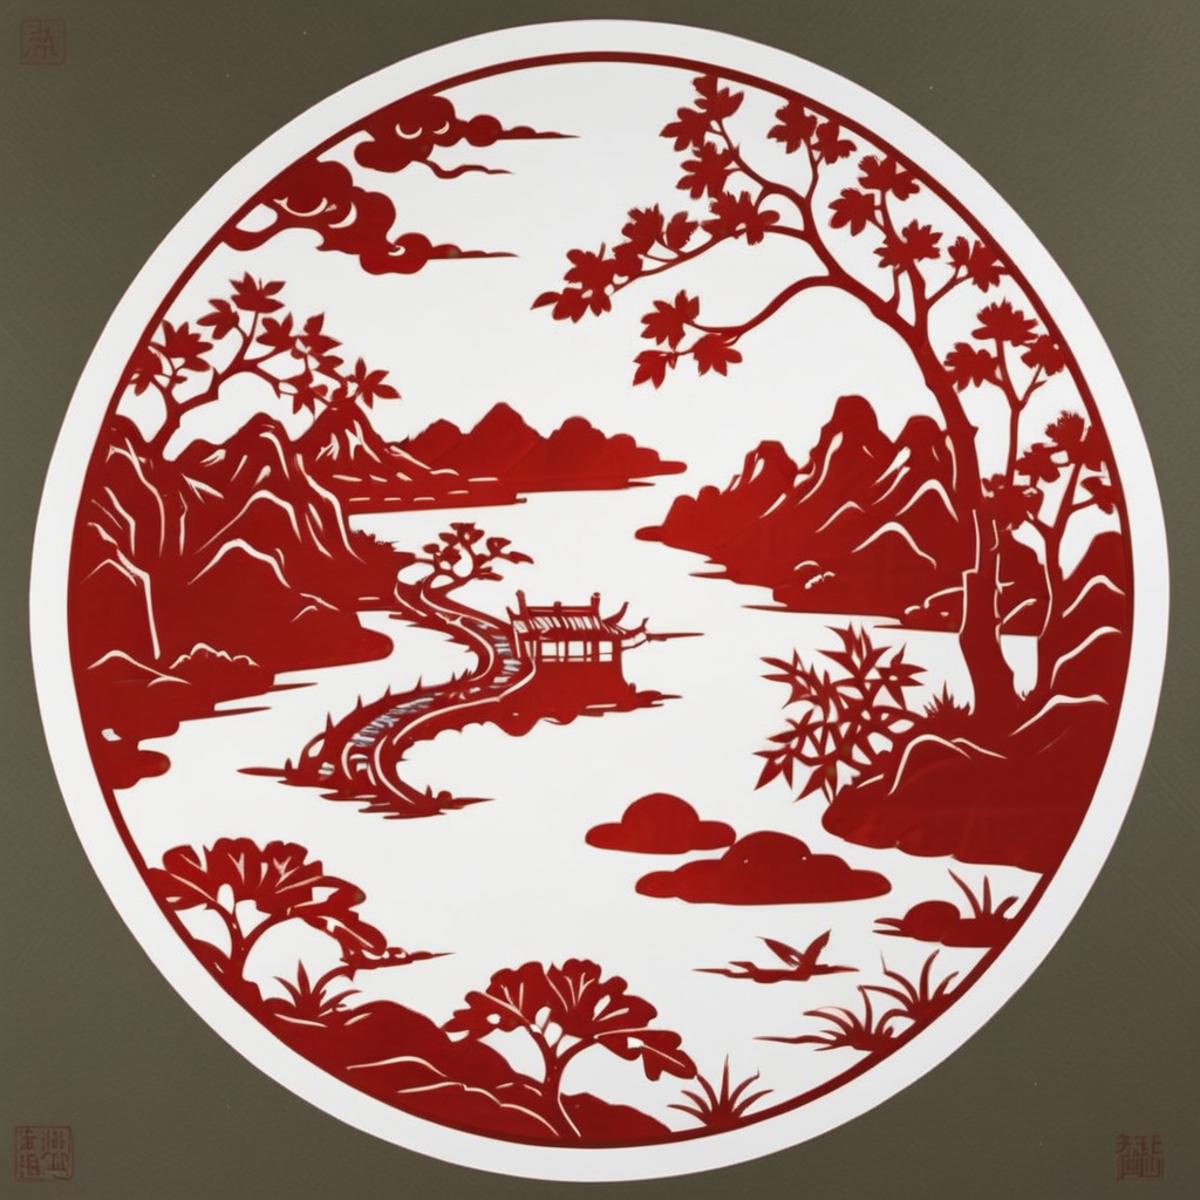 Chinese paper-cutting Style | SDXL image by allpleoleo439